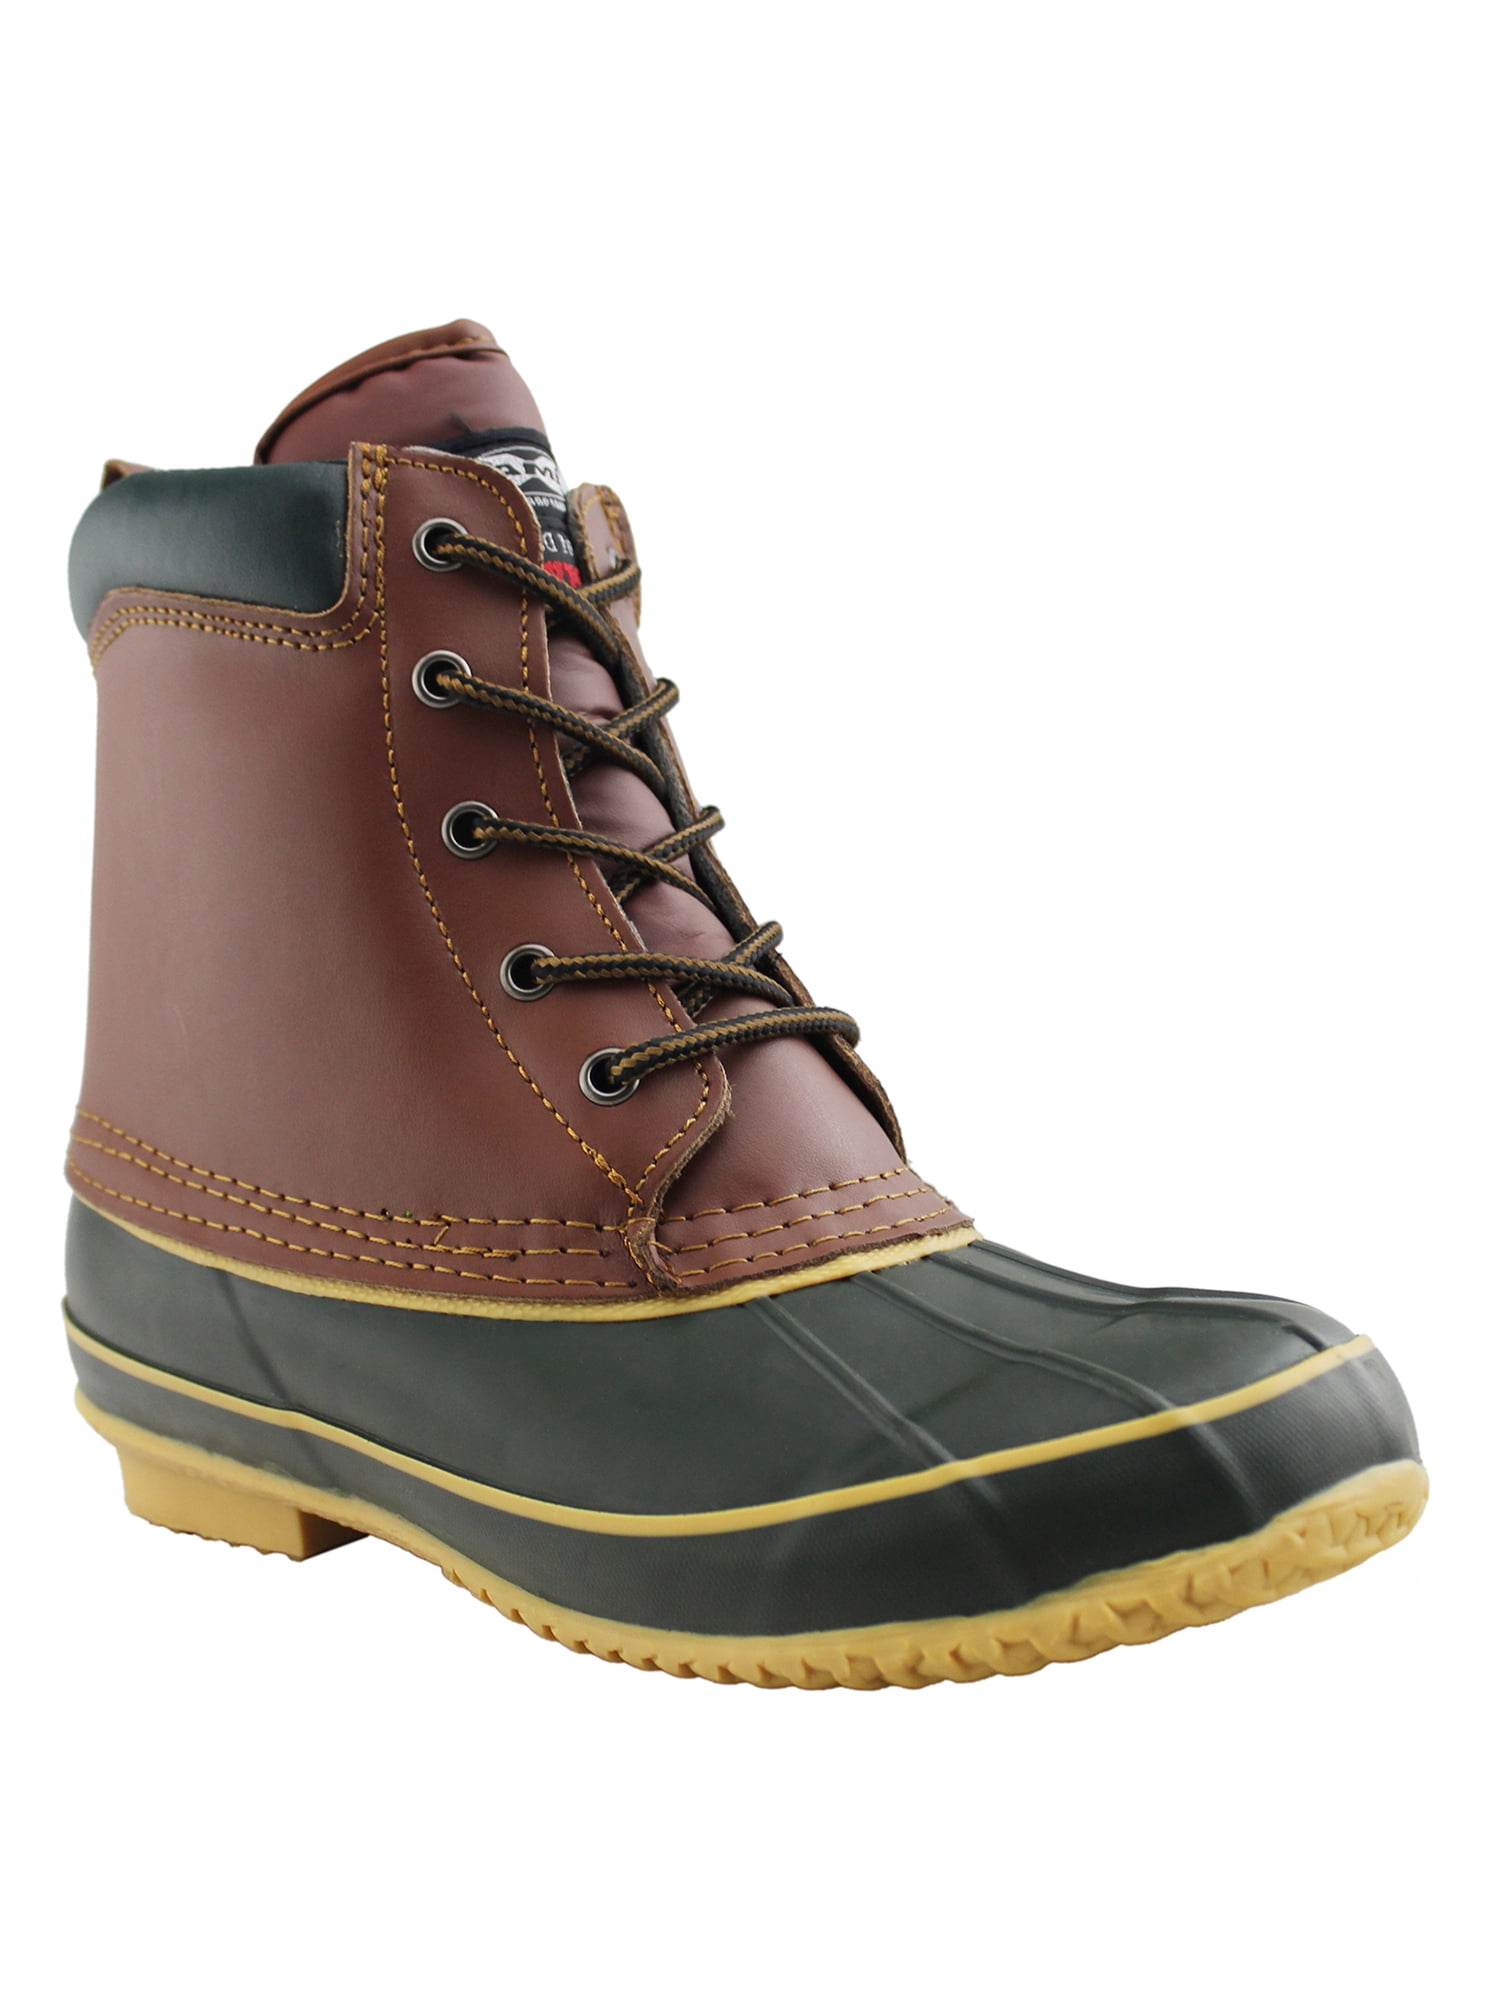 men's insulated water boots